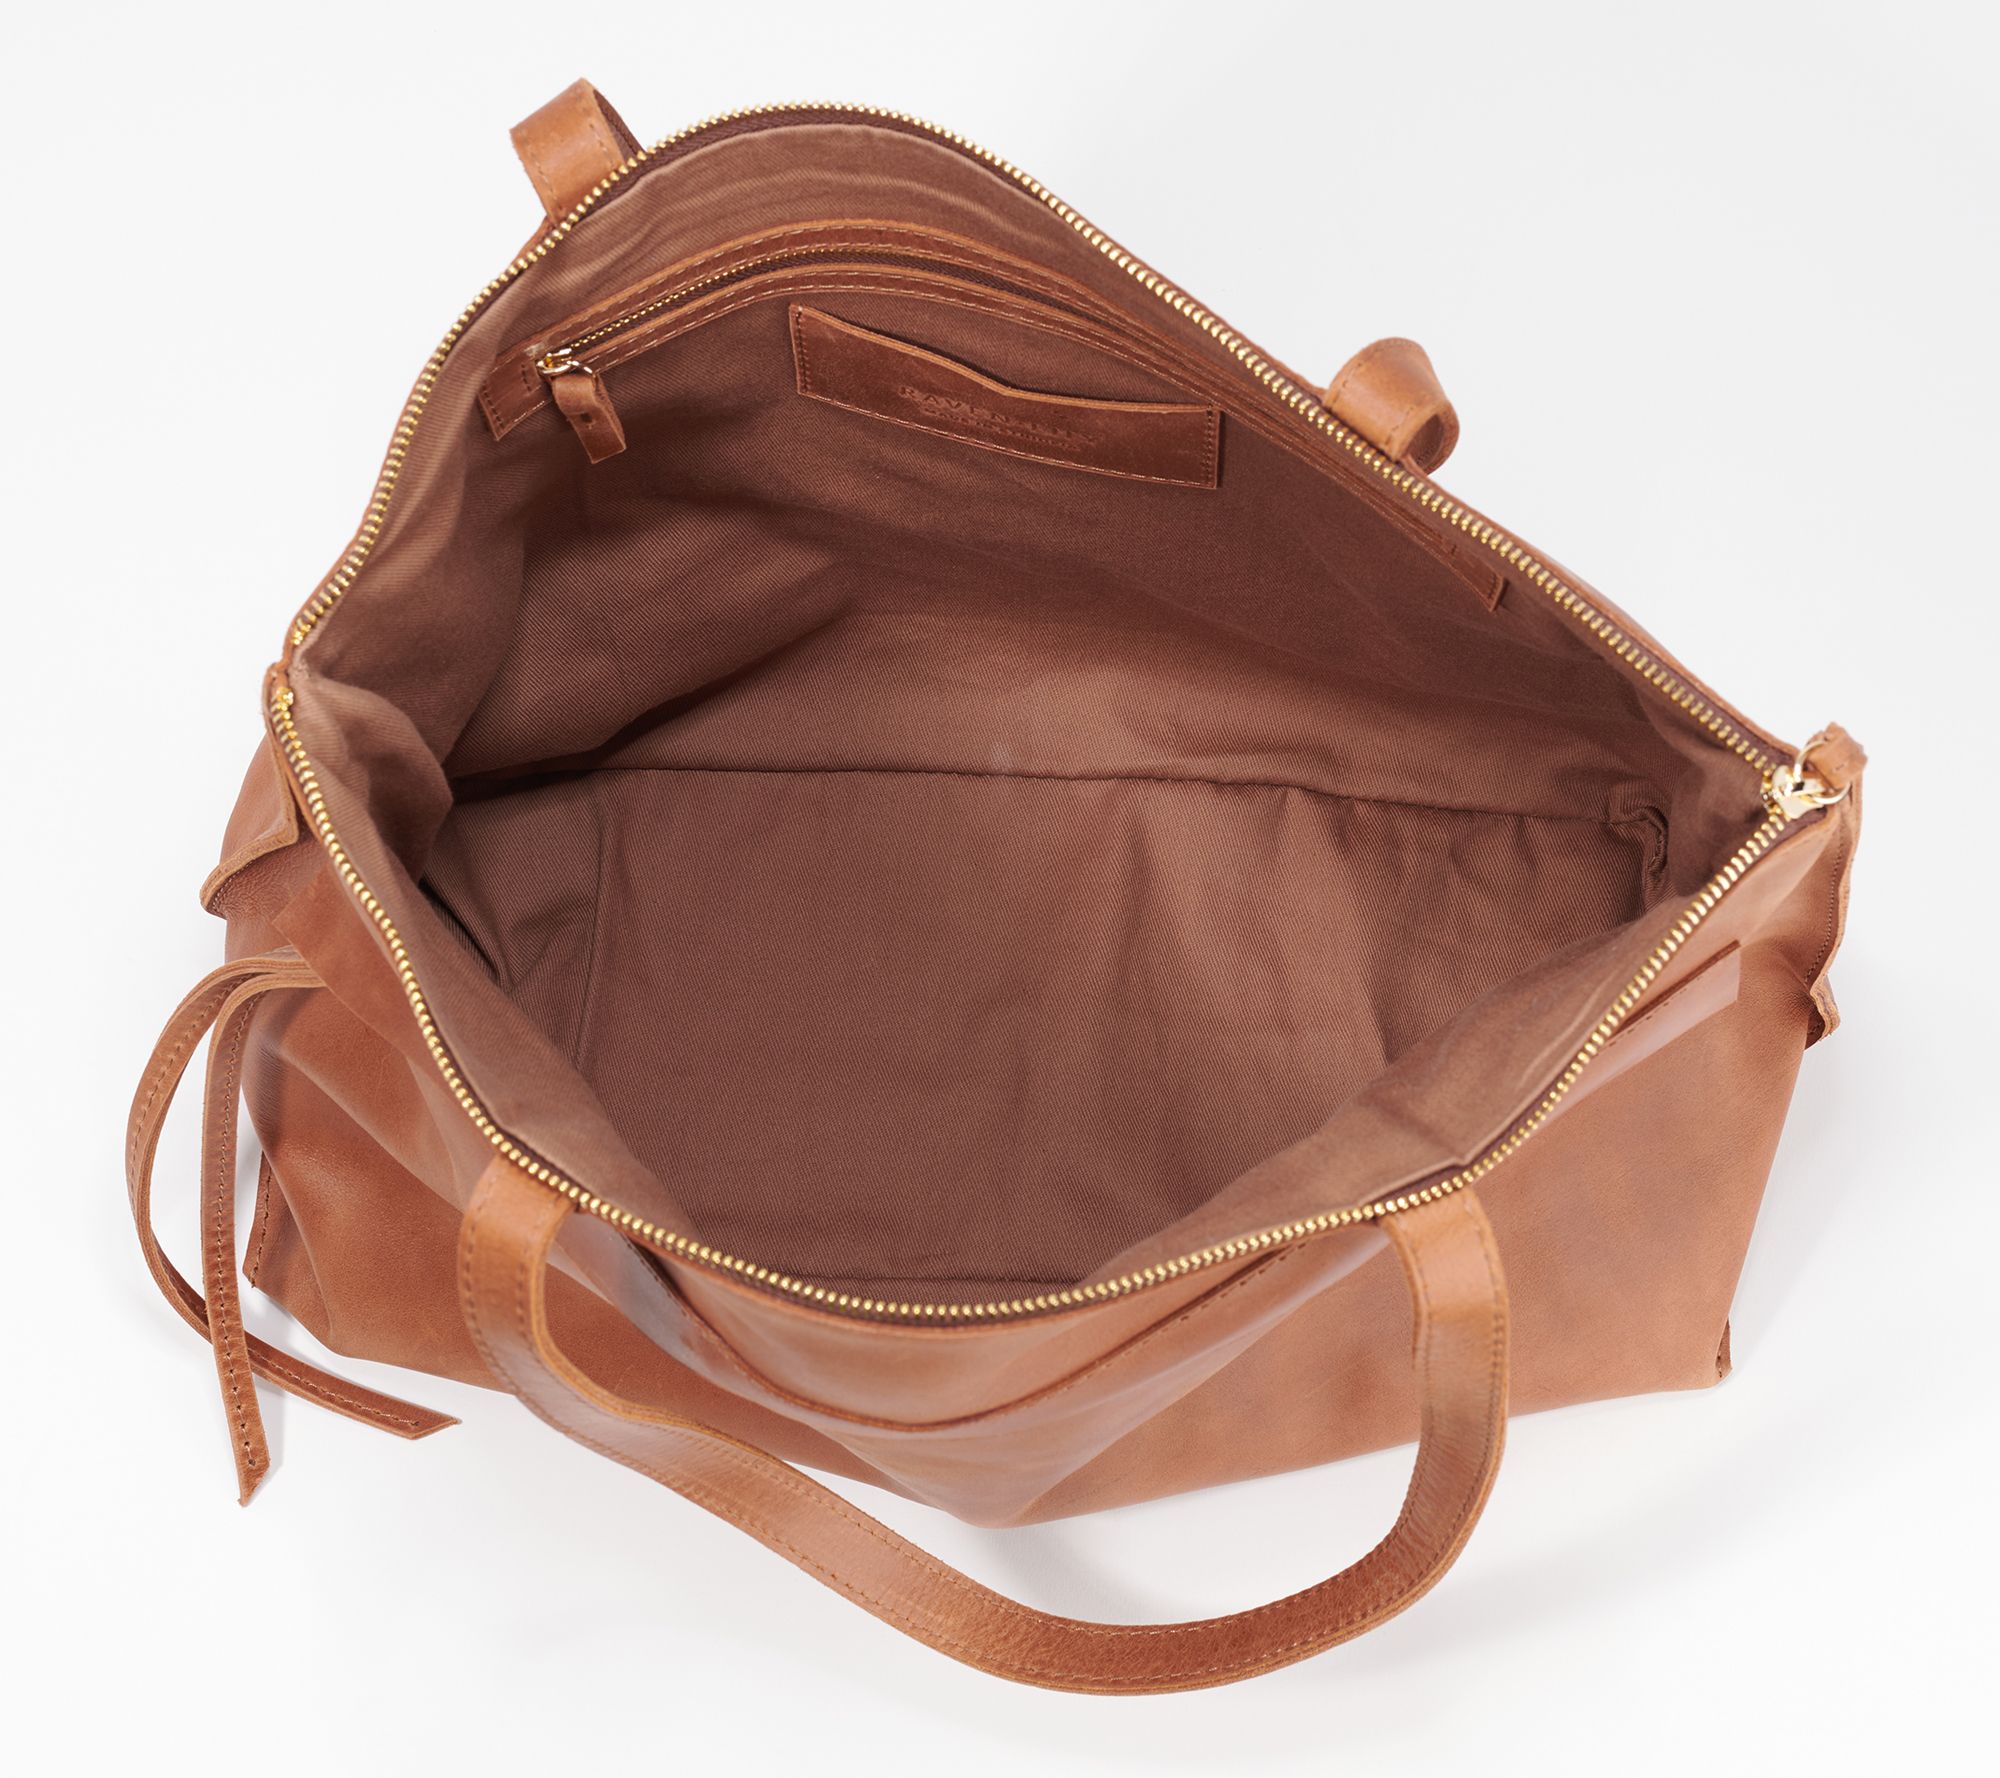 Raven + Lily Leather Addis Weekender Tote - QVC.com